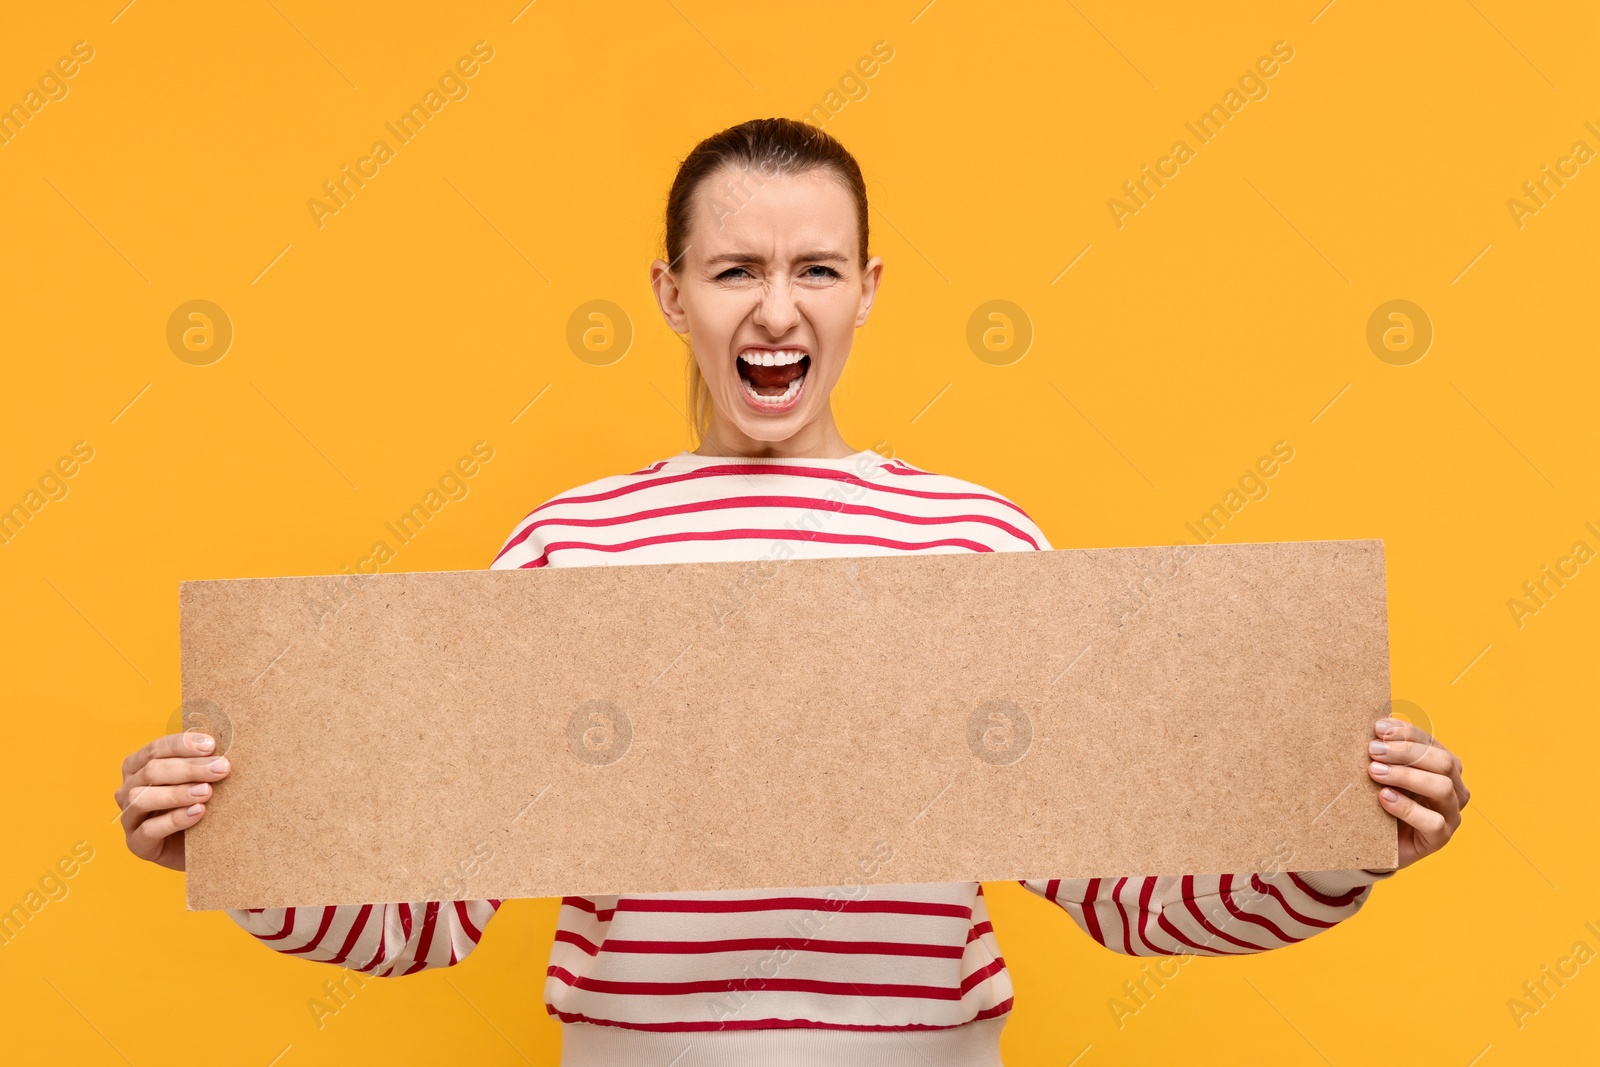 Photo of Screaming woman holding blank cardboard banner on orange background, space for text